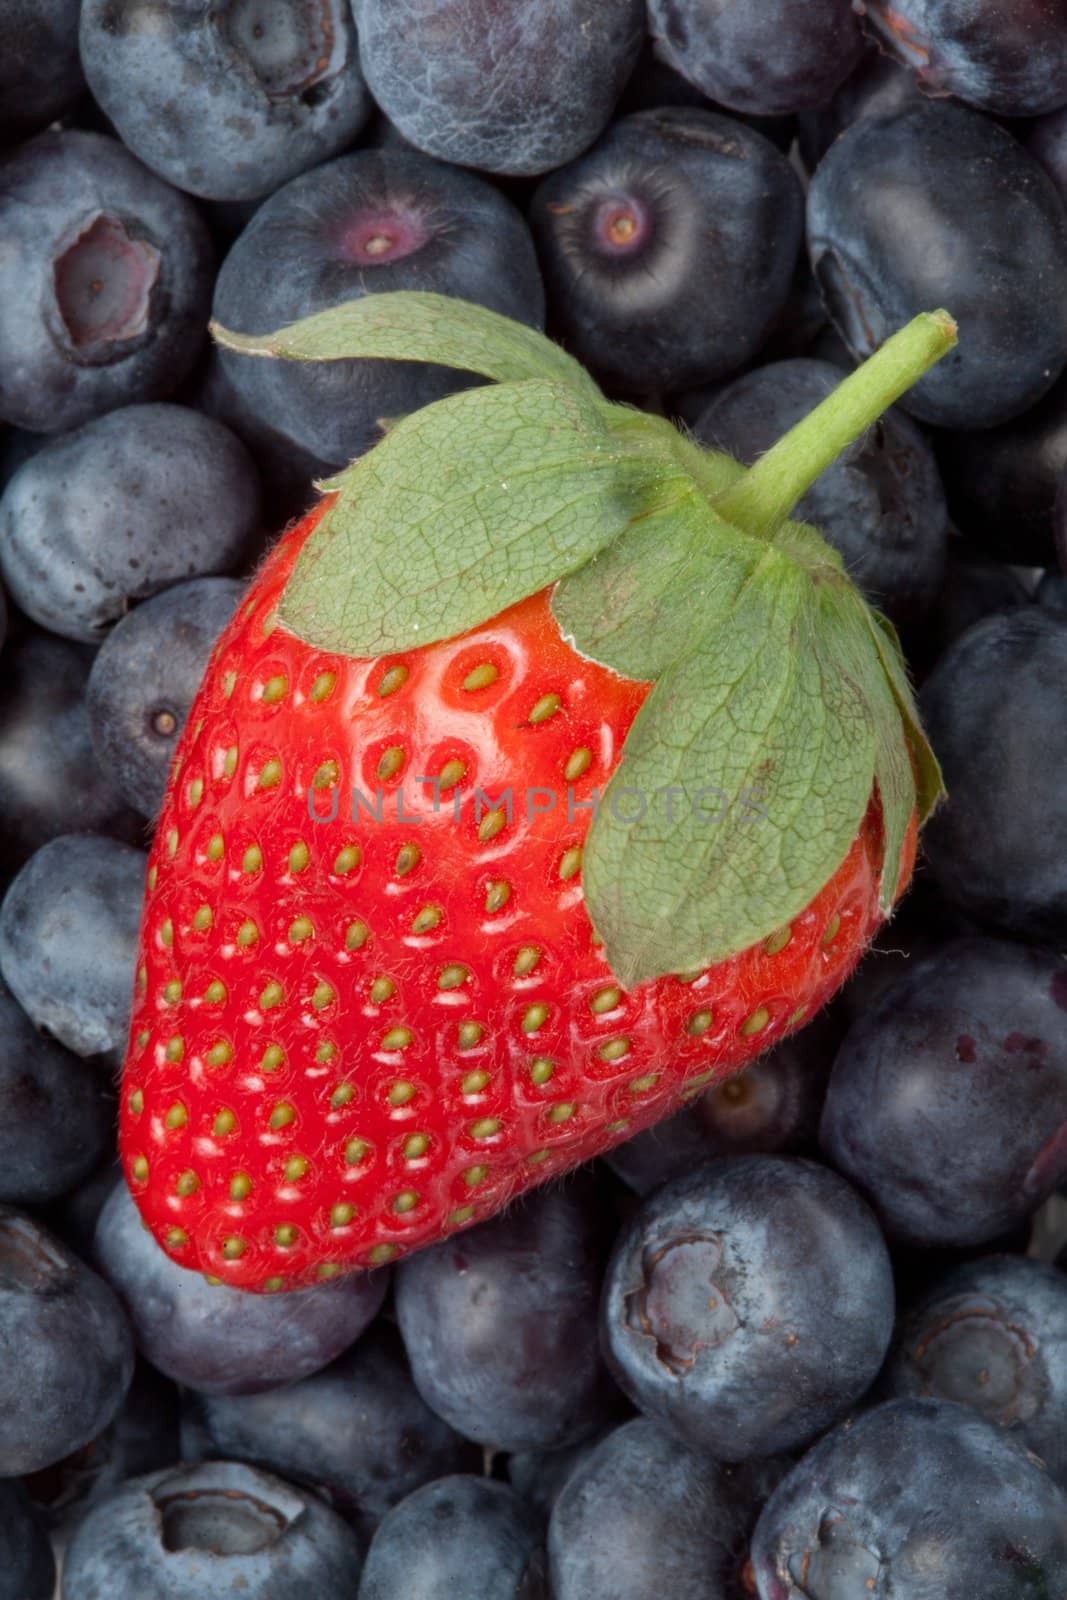 Strawberry in the middle of blueberries by Wavebreakmedia